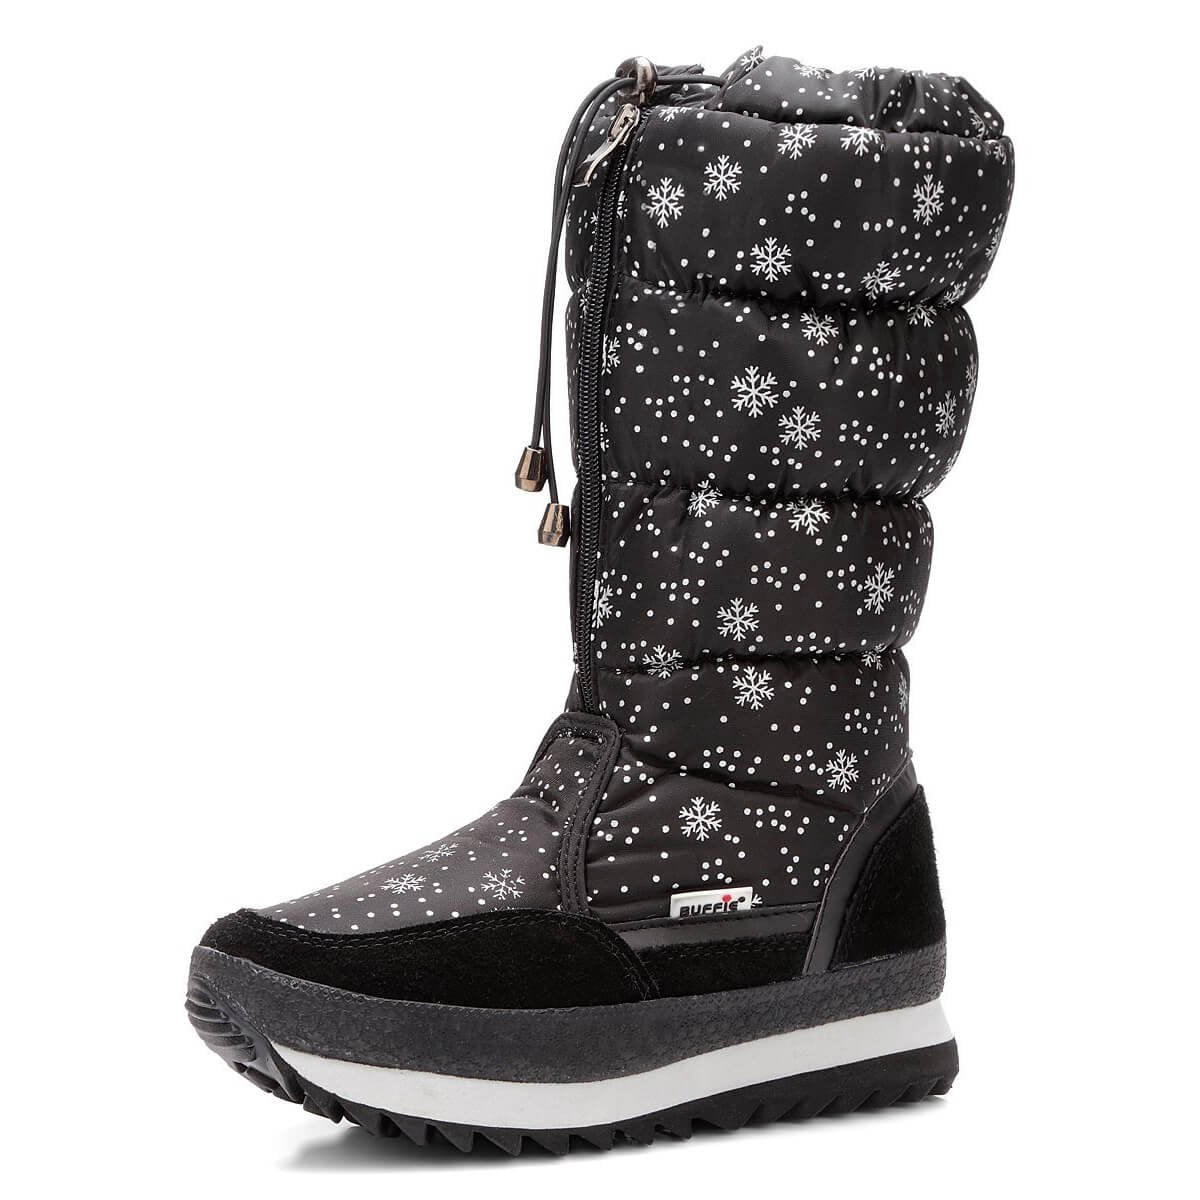 Black and Silver Snowflake Women Winter Snowboots